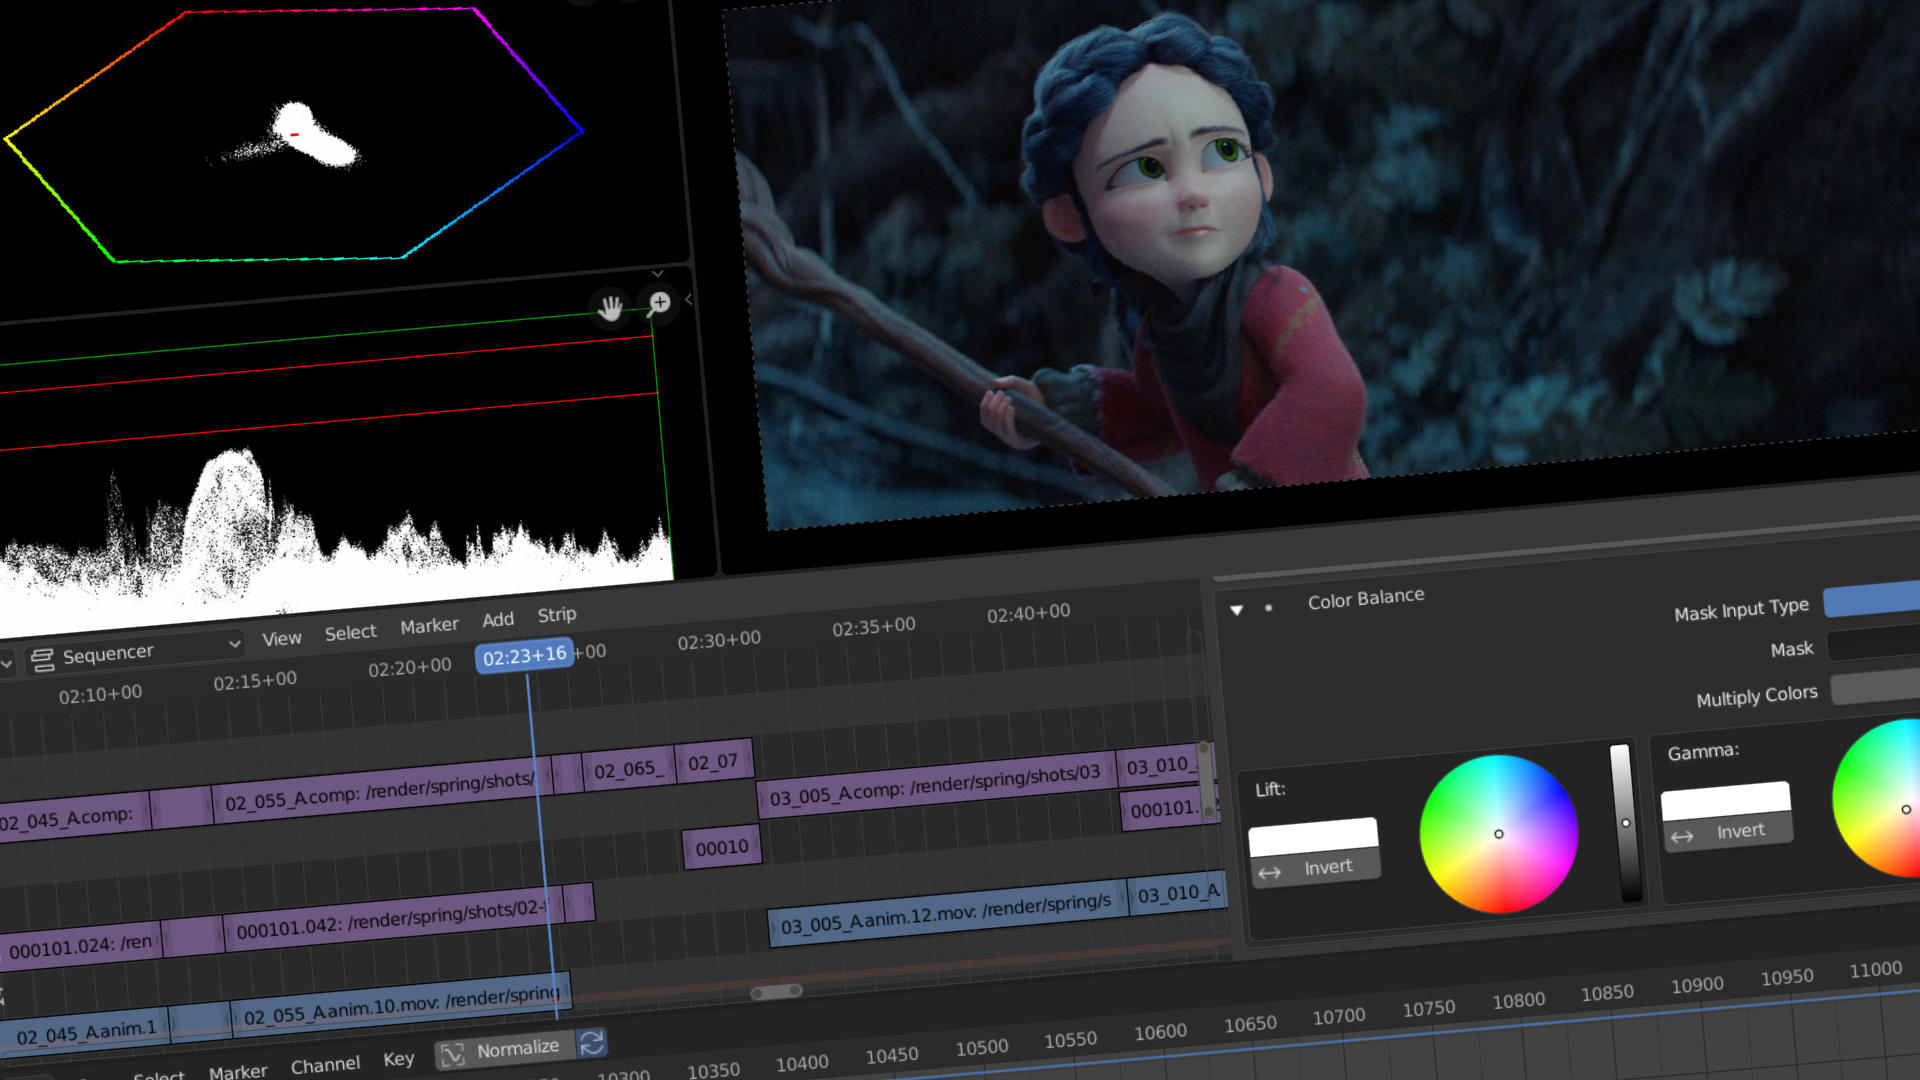 quicktime video editor for windows download free splicer